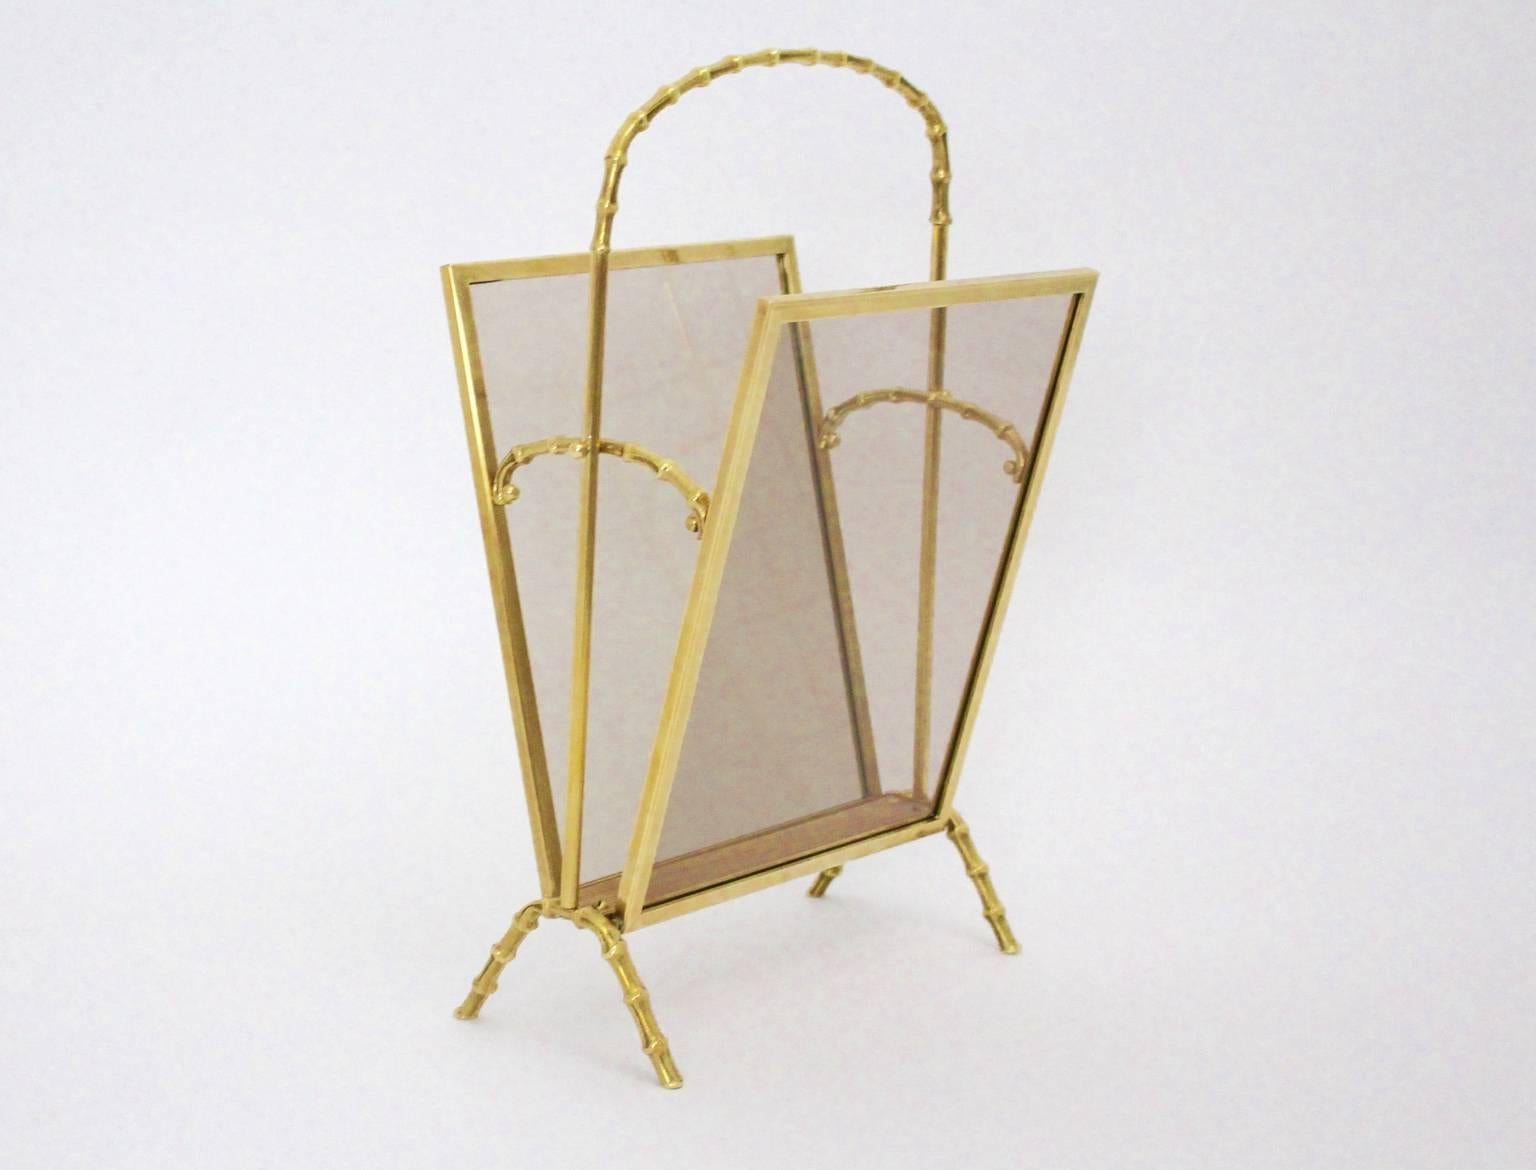 Mid Century Modern vintage faux bamboo newspaper rack or magazine rack by Maison Bagues, 1940s France.
An amazing newspaper rack from solid brass and smoked glass bamboo like.
This magazine rack consists of solid polished brass frame and two smoked